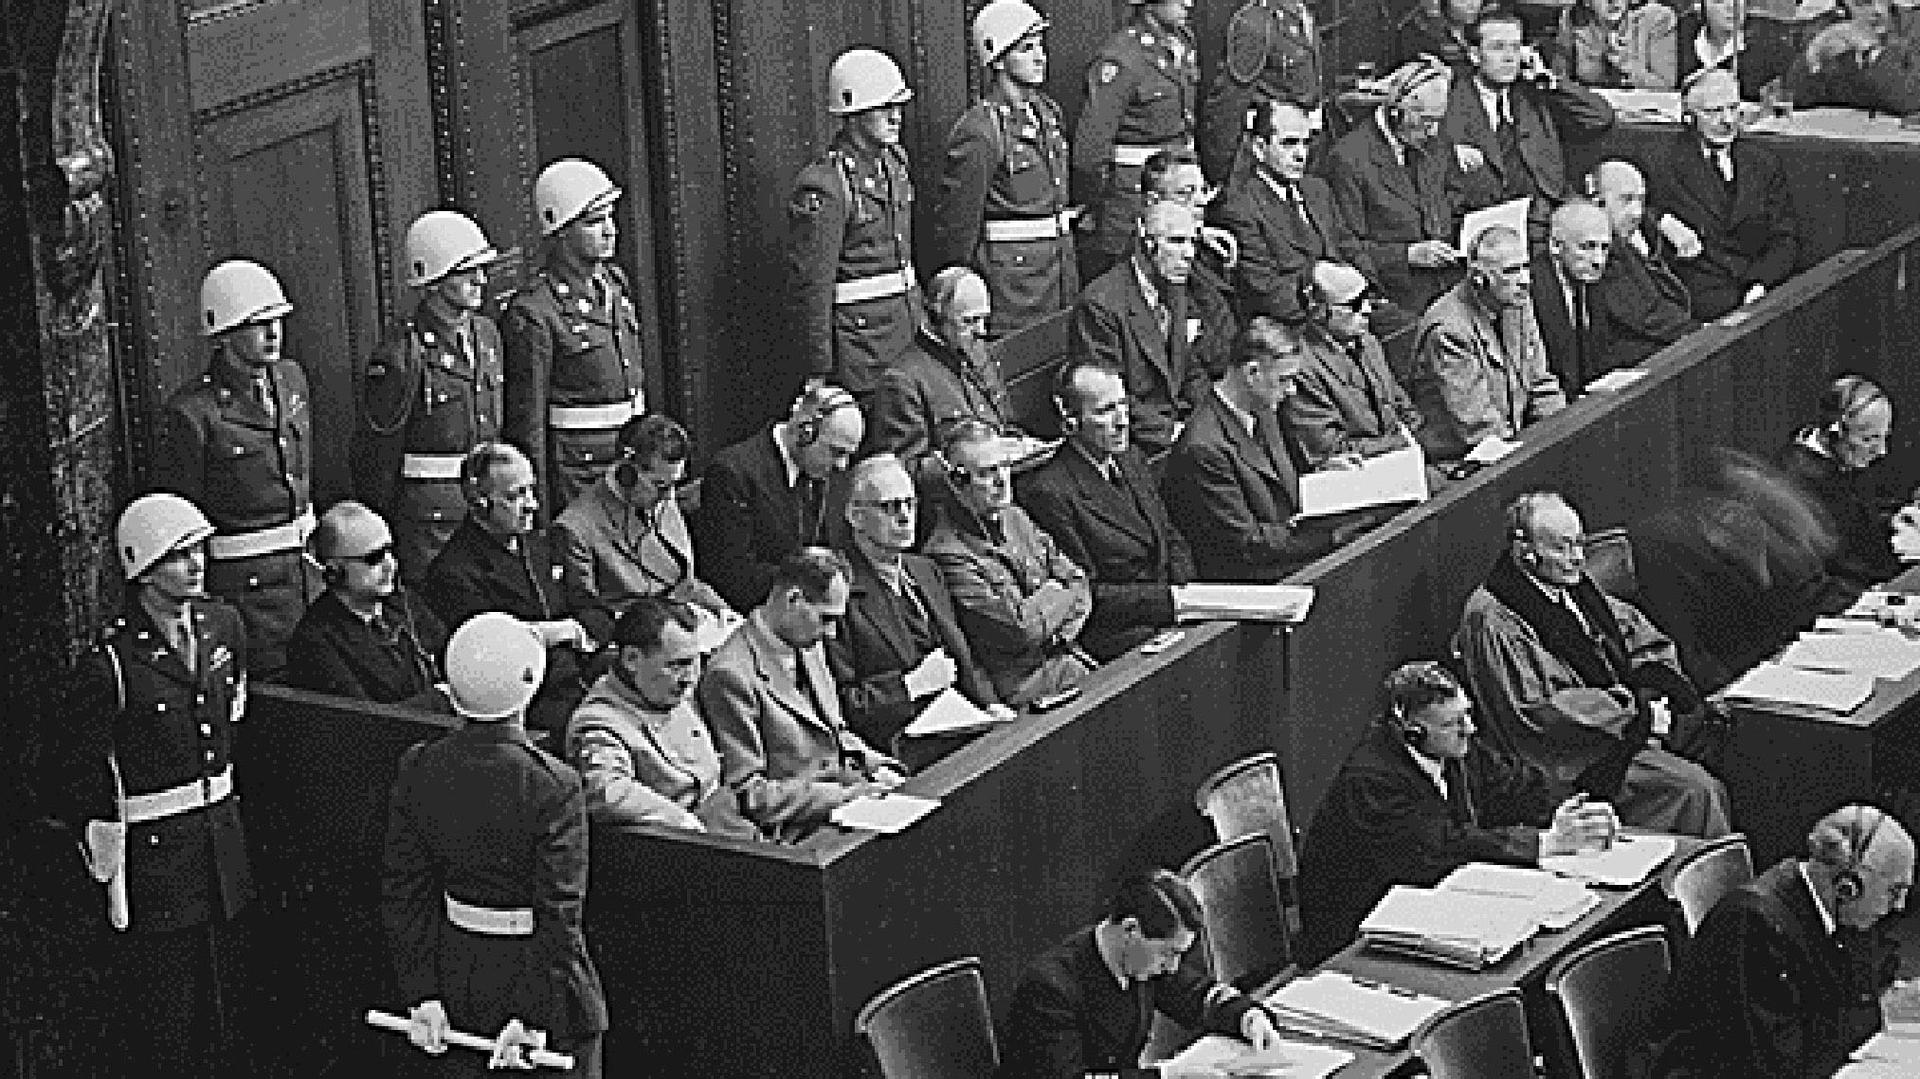 Defendents sit in a juror box and at tables during the Nuremberg trials in this historic photo 